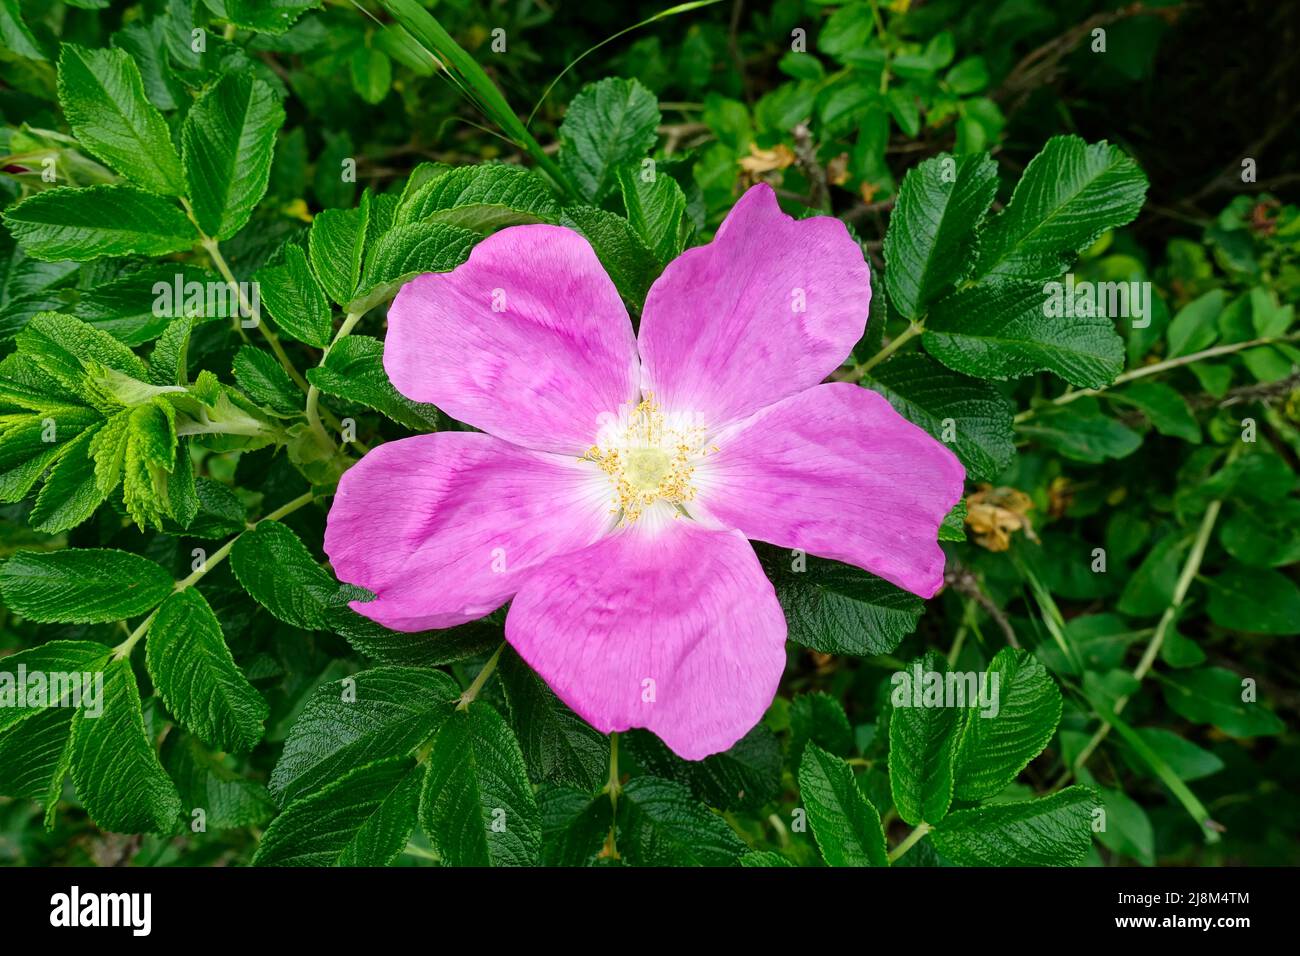 Rose hip or rosehip, also called rose haw and rose hip, is the accessory fruit of the rose plant, Germany Stock Photo